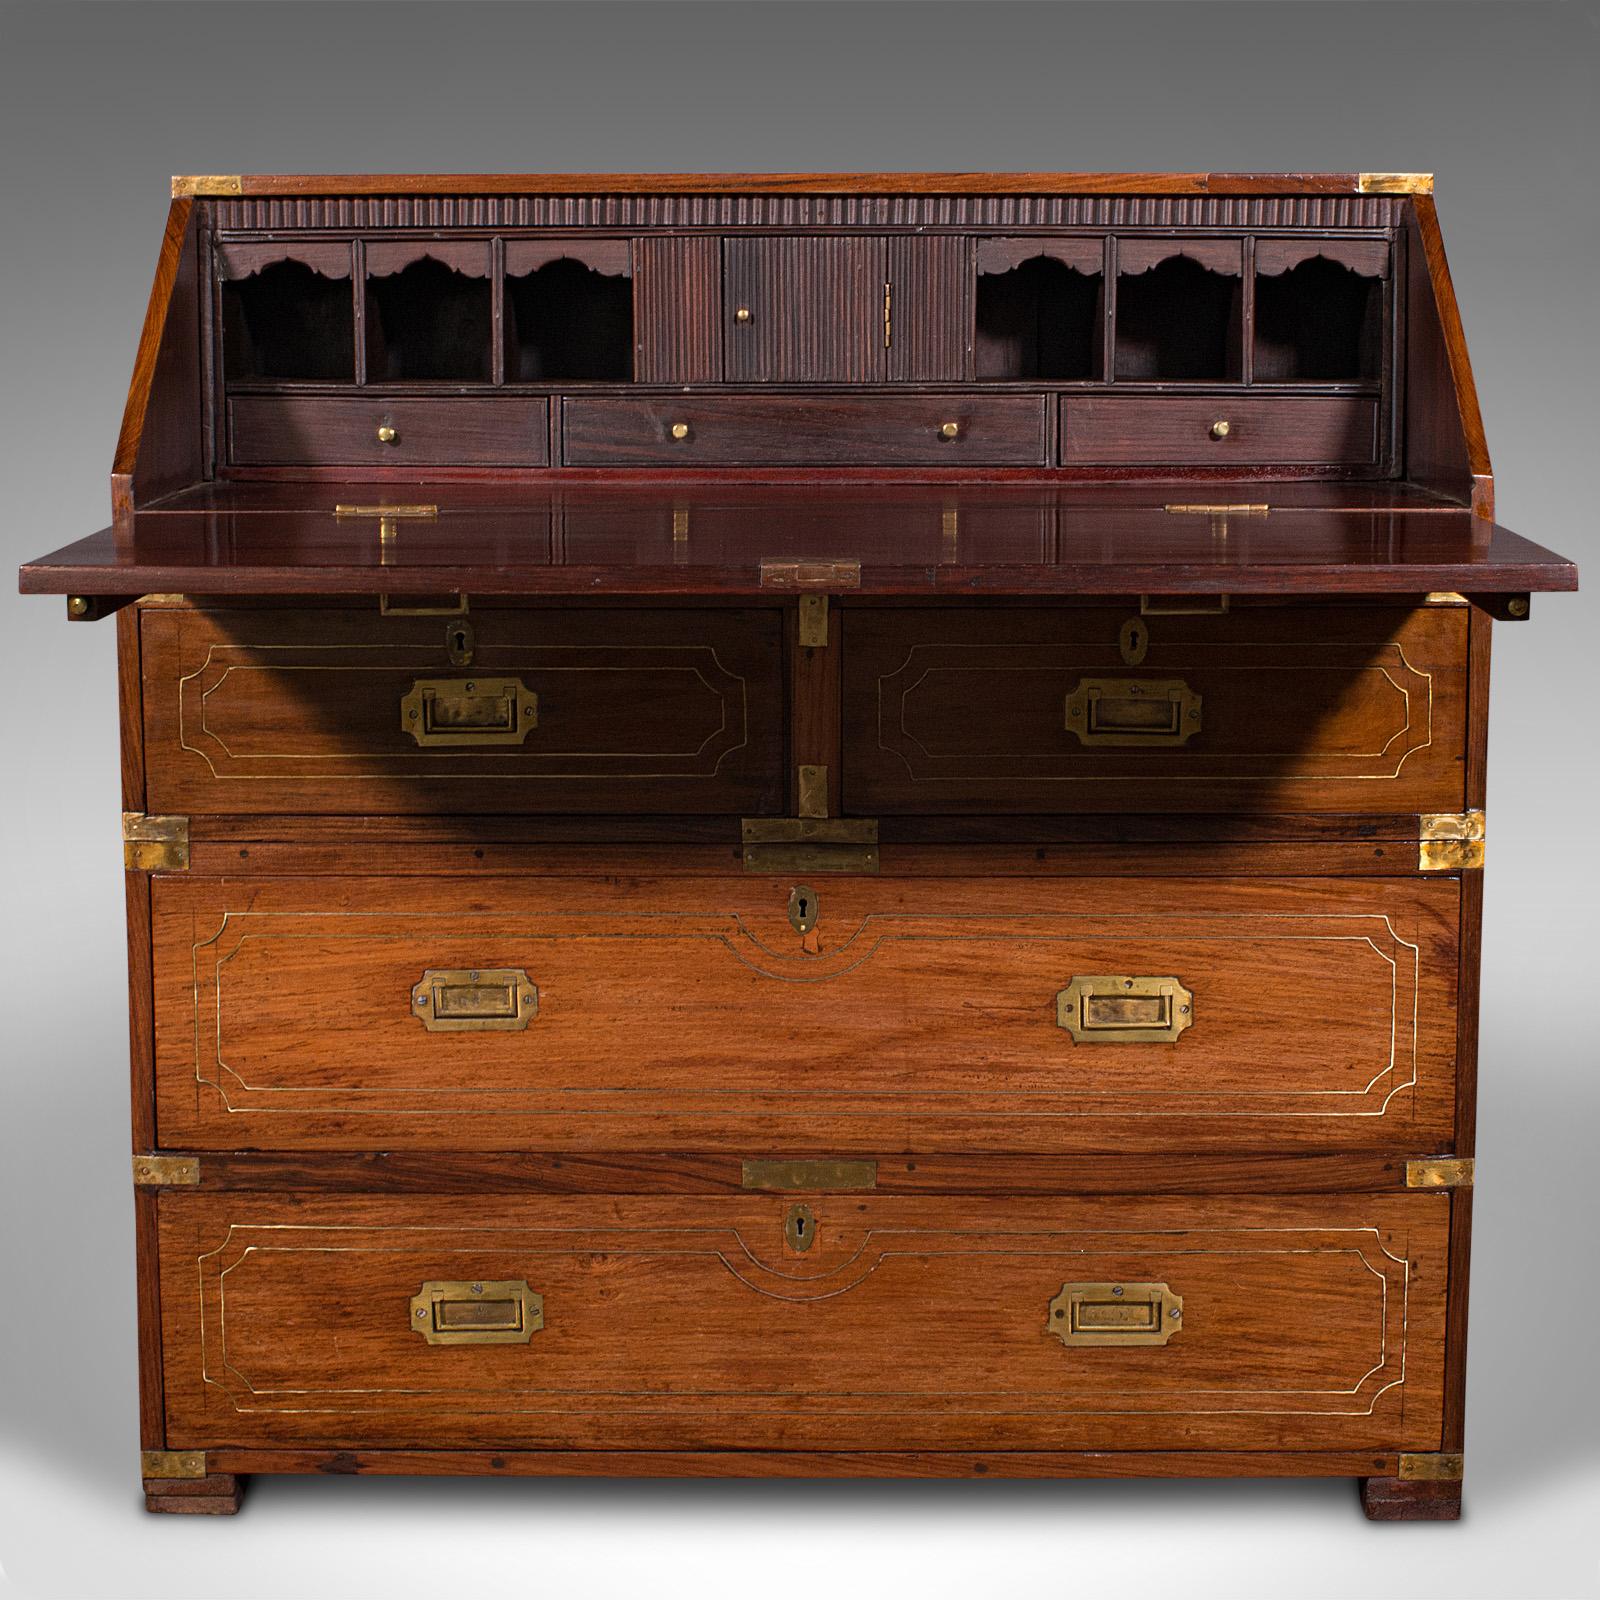 Antique Campaign Bureau, Anglo Indian, Teak, Colonial Writing Desk, Victorian In Good Condition For Sale In Hele, Devon, GB